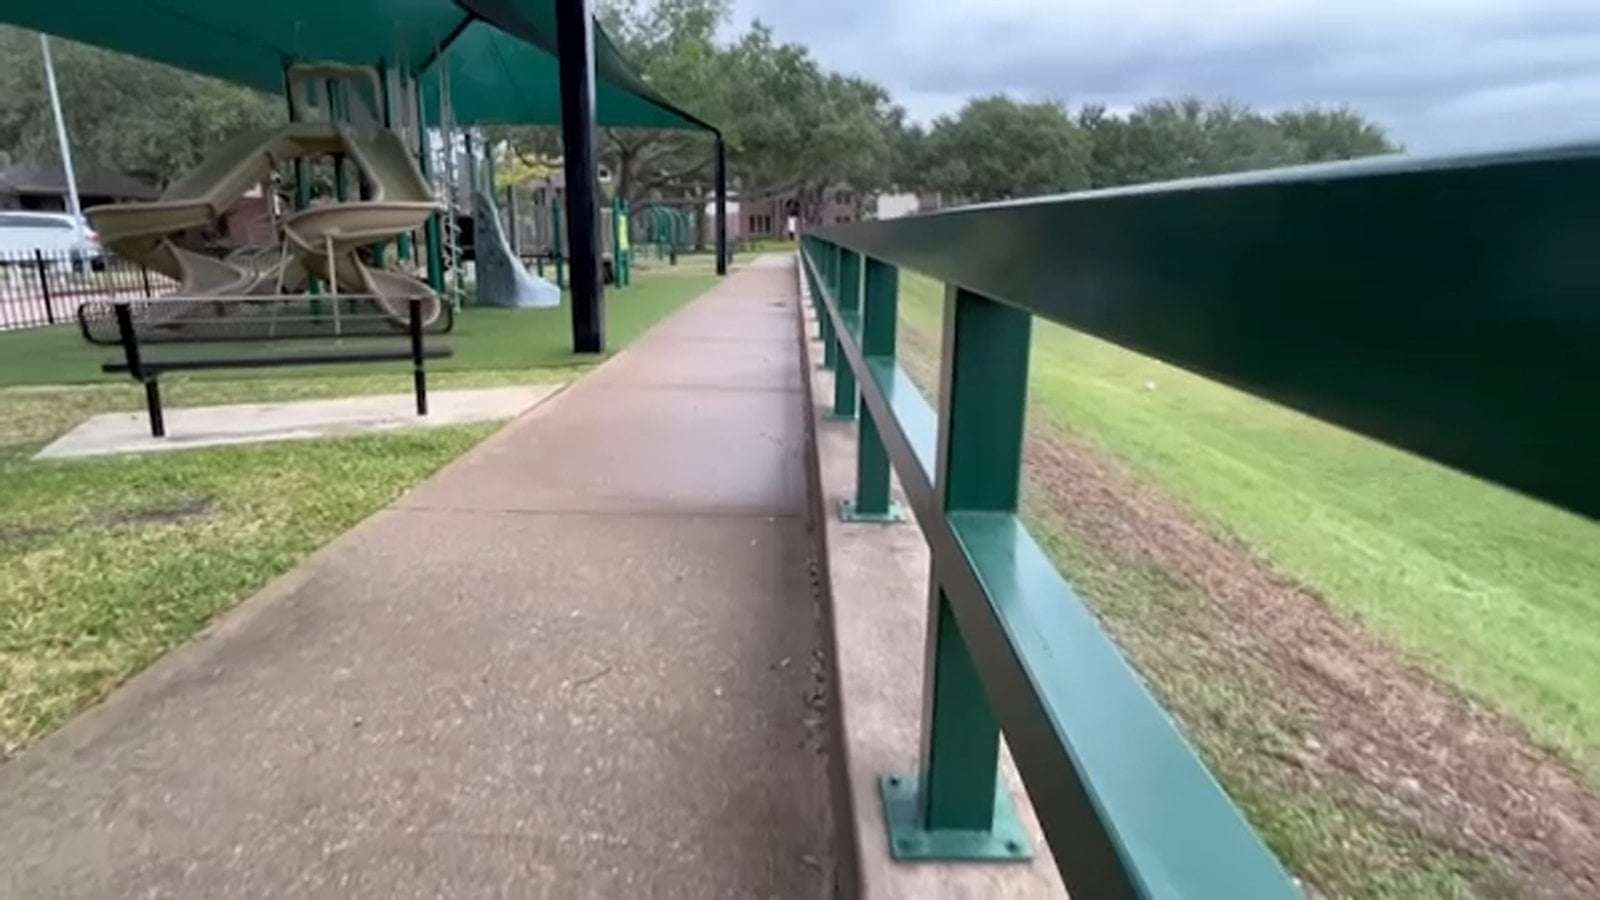 image for Teen admits to filming TikTok prank of him assaulting people at Wortham Park: 'I didn't mean it'